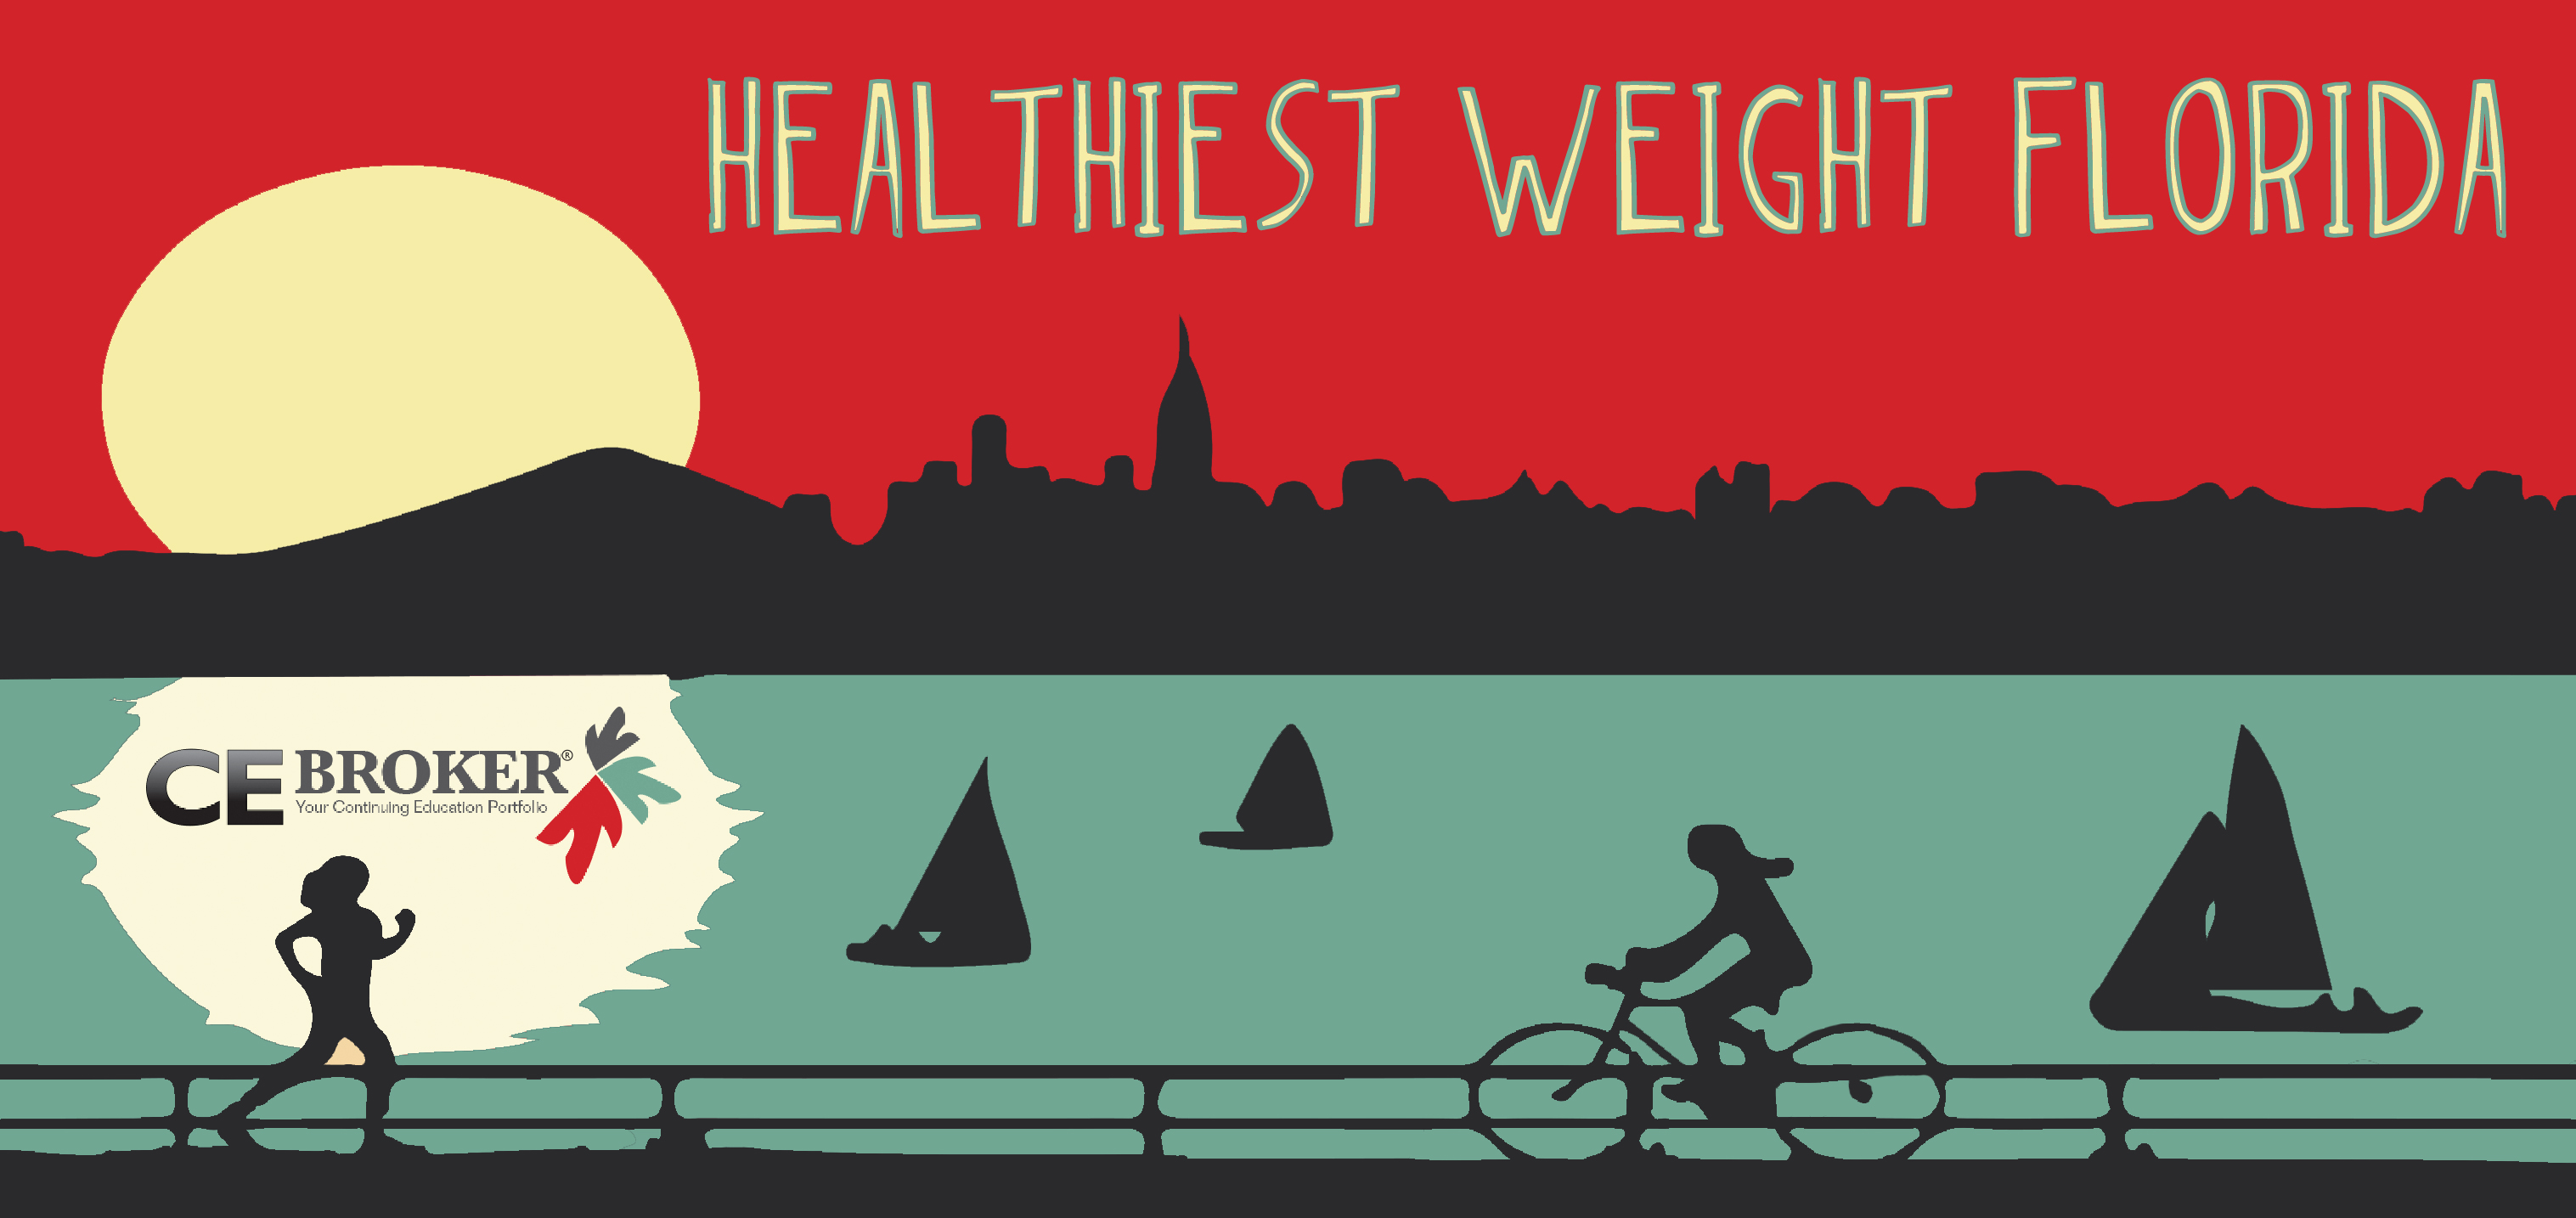 CE Broker is happy to be participating in the Surgeon General's Healthiest Weight Initiative. Let's get healthy, Florida.